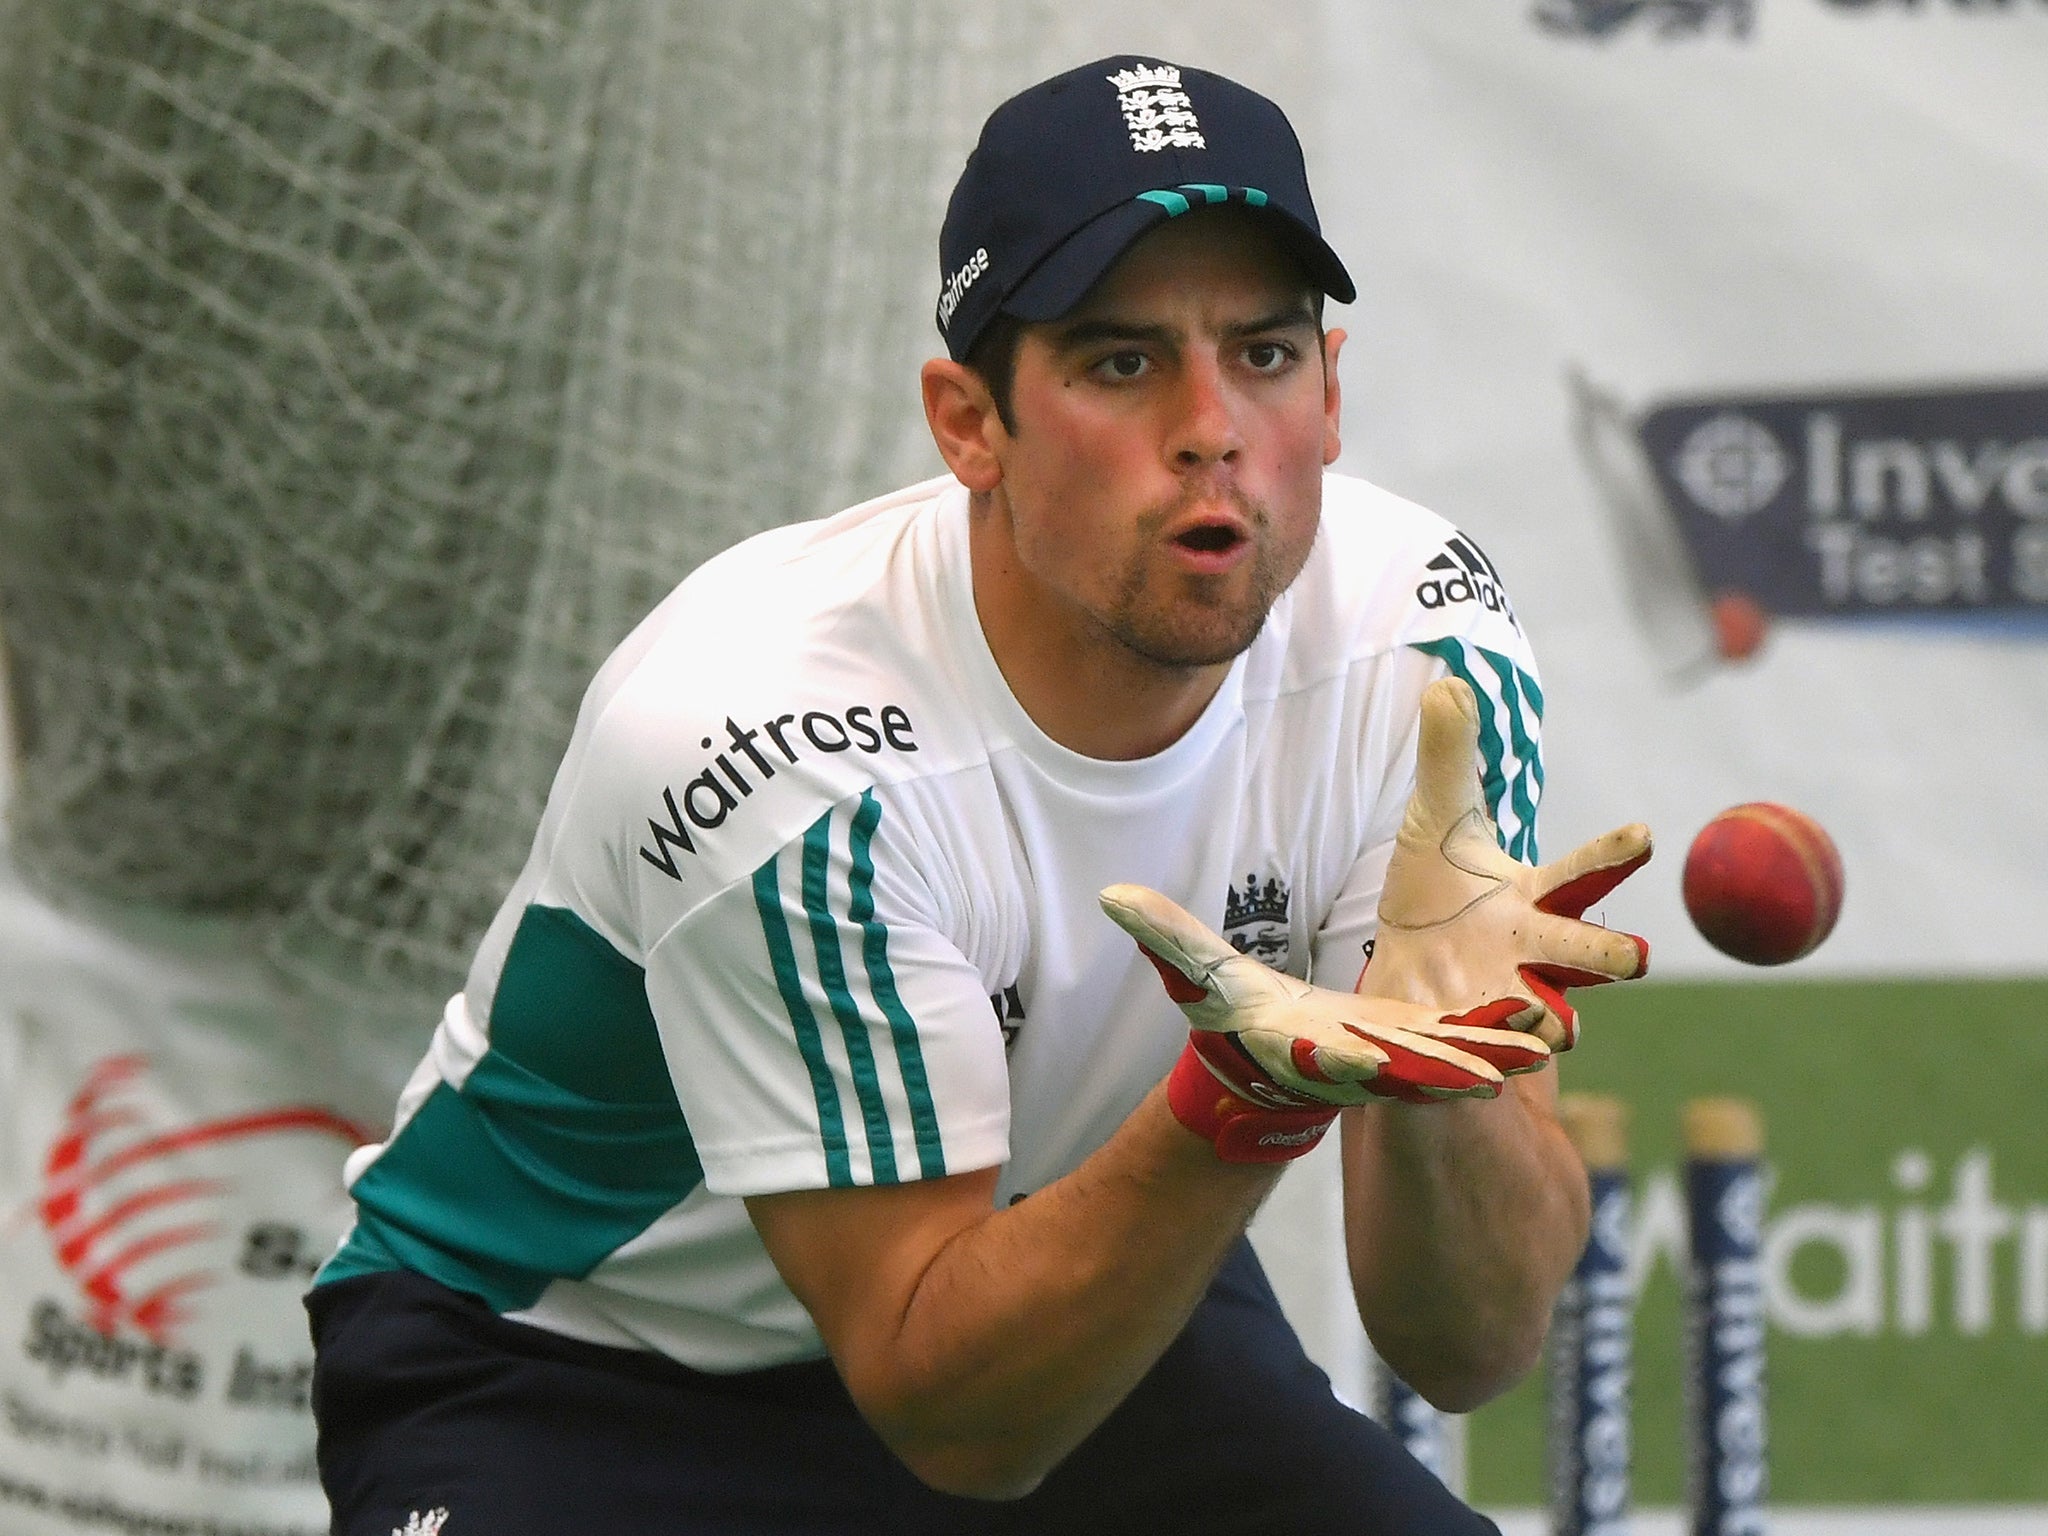 Alastair Cook keeps his eye on the ball during nets on Thursday